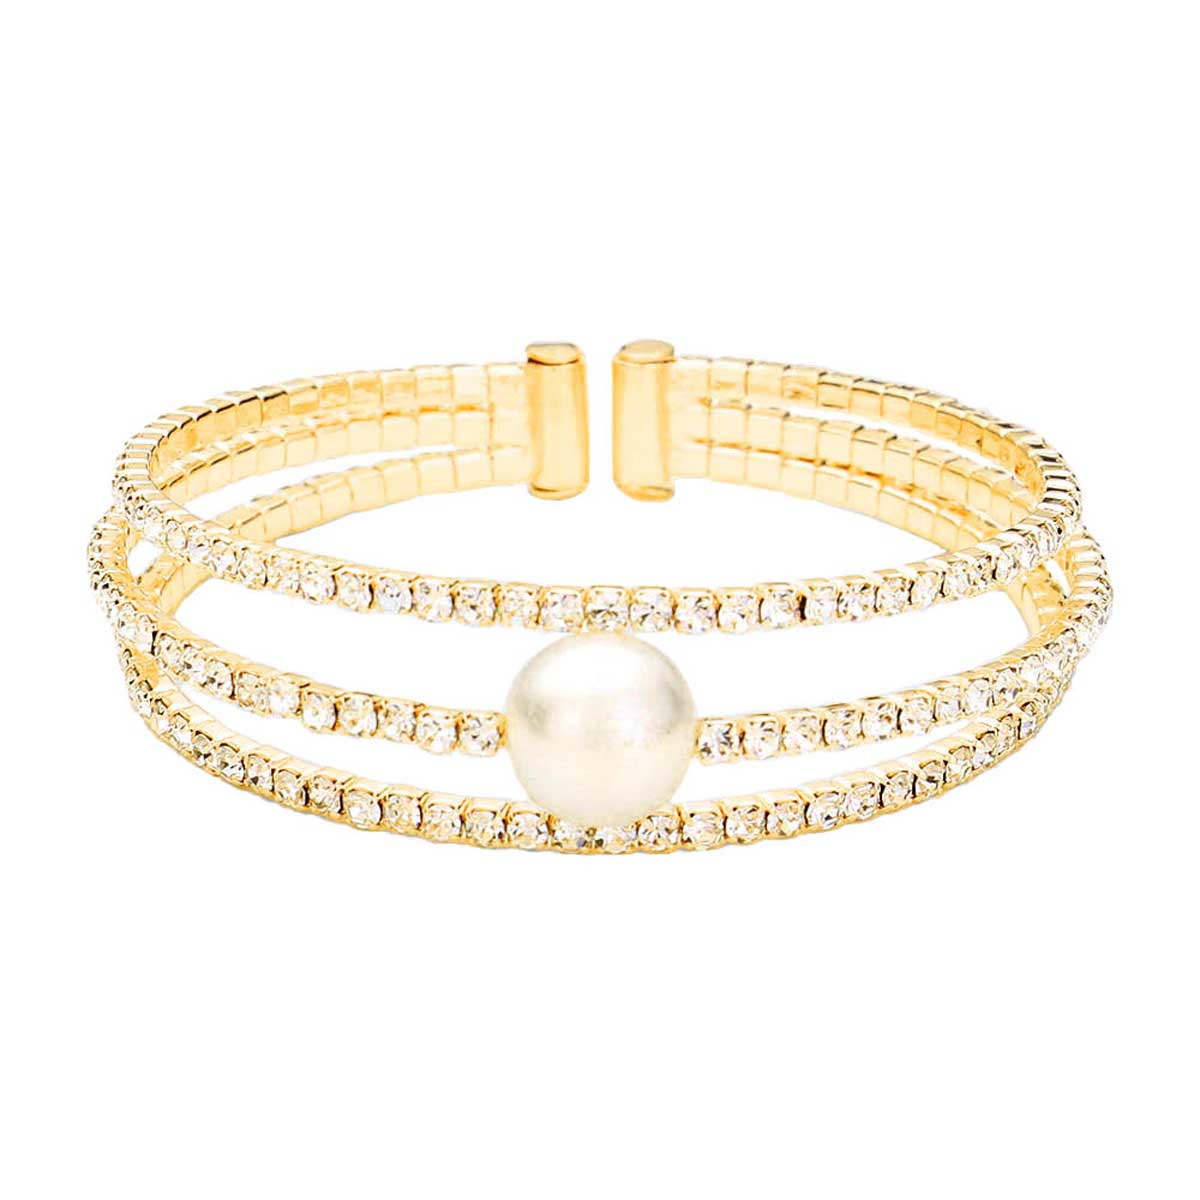 Gold Pearl Accented Split Rhinestone Evening Cuff Bracelet. These gorgeous rhinestone pieces will show your class in any special occasion. The elegance of these rhinestone goes unmatched, great for wearing at a party! Perfect jewelry to enhance your look. Awesome gift for birthday, Anniversary, Valentine’s Day or any special occasion.